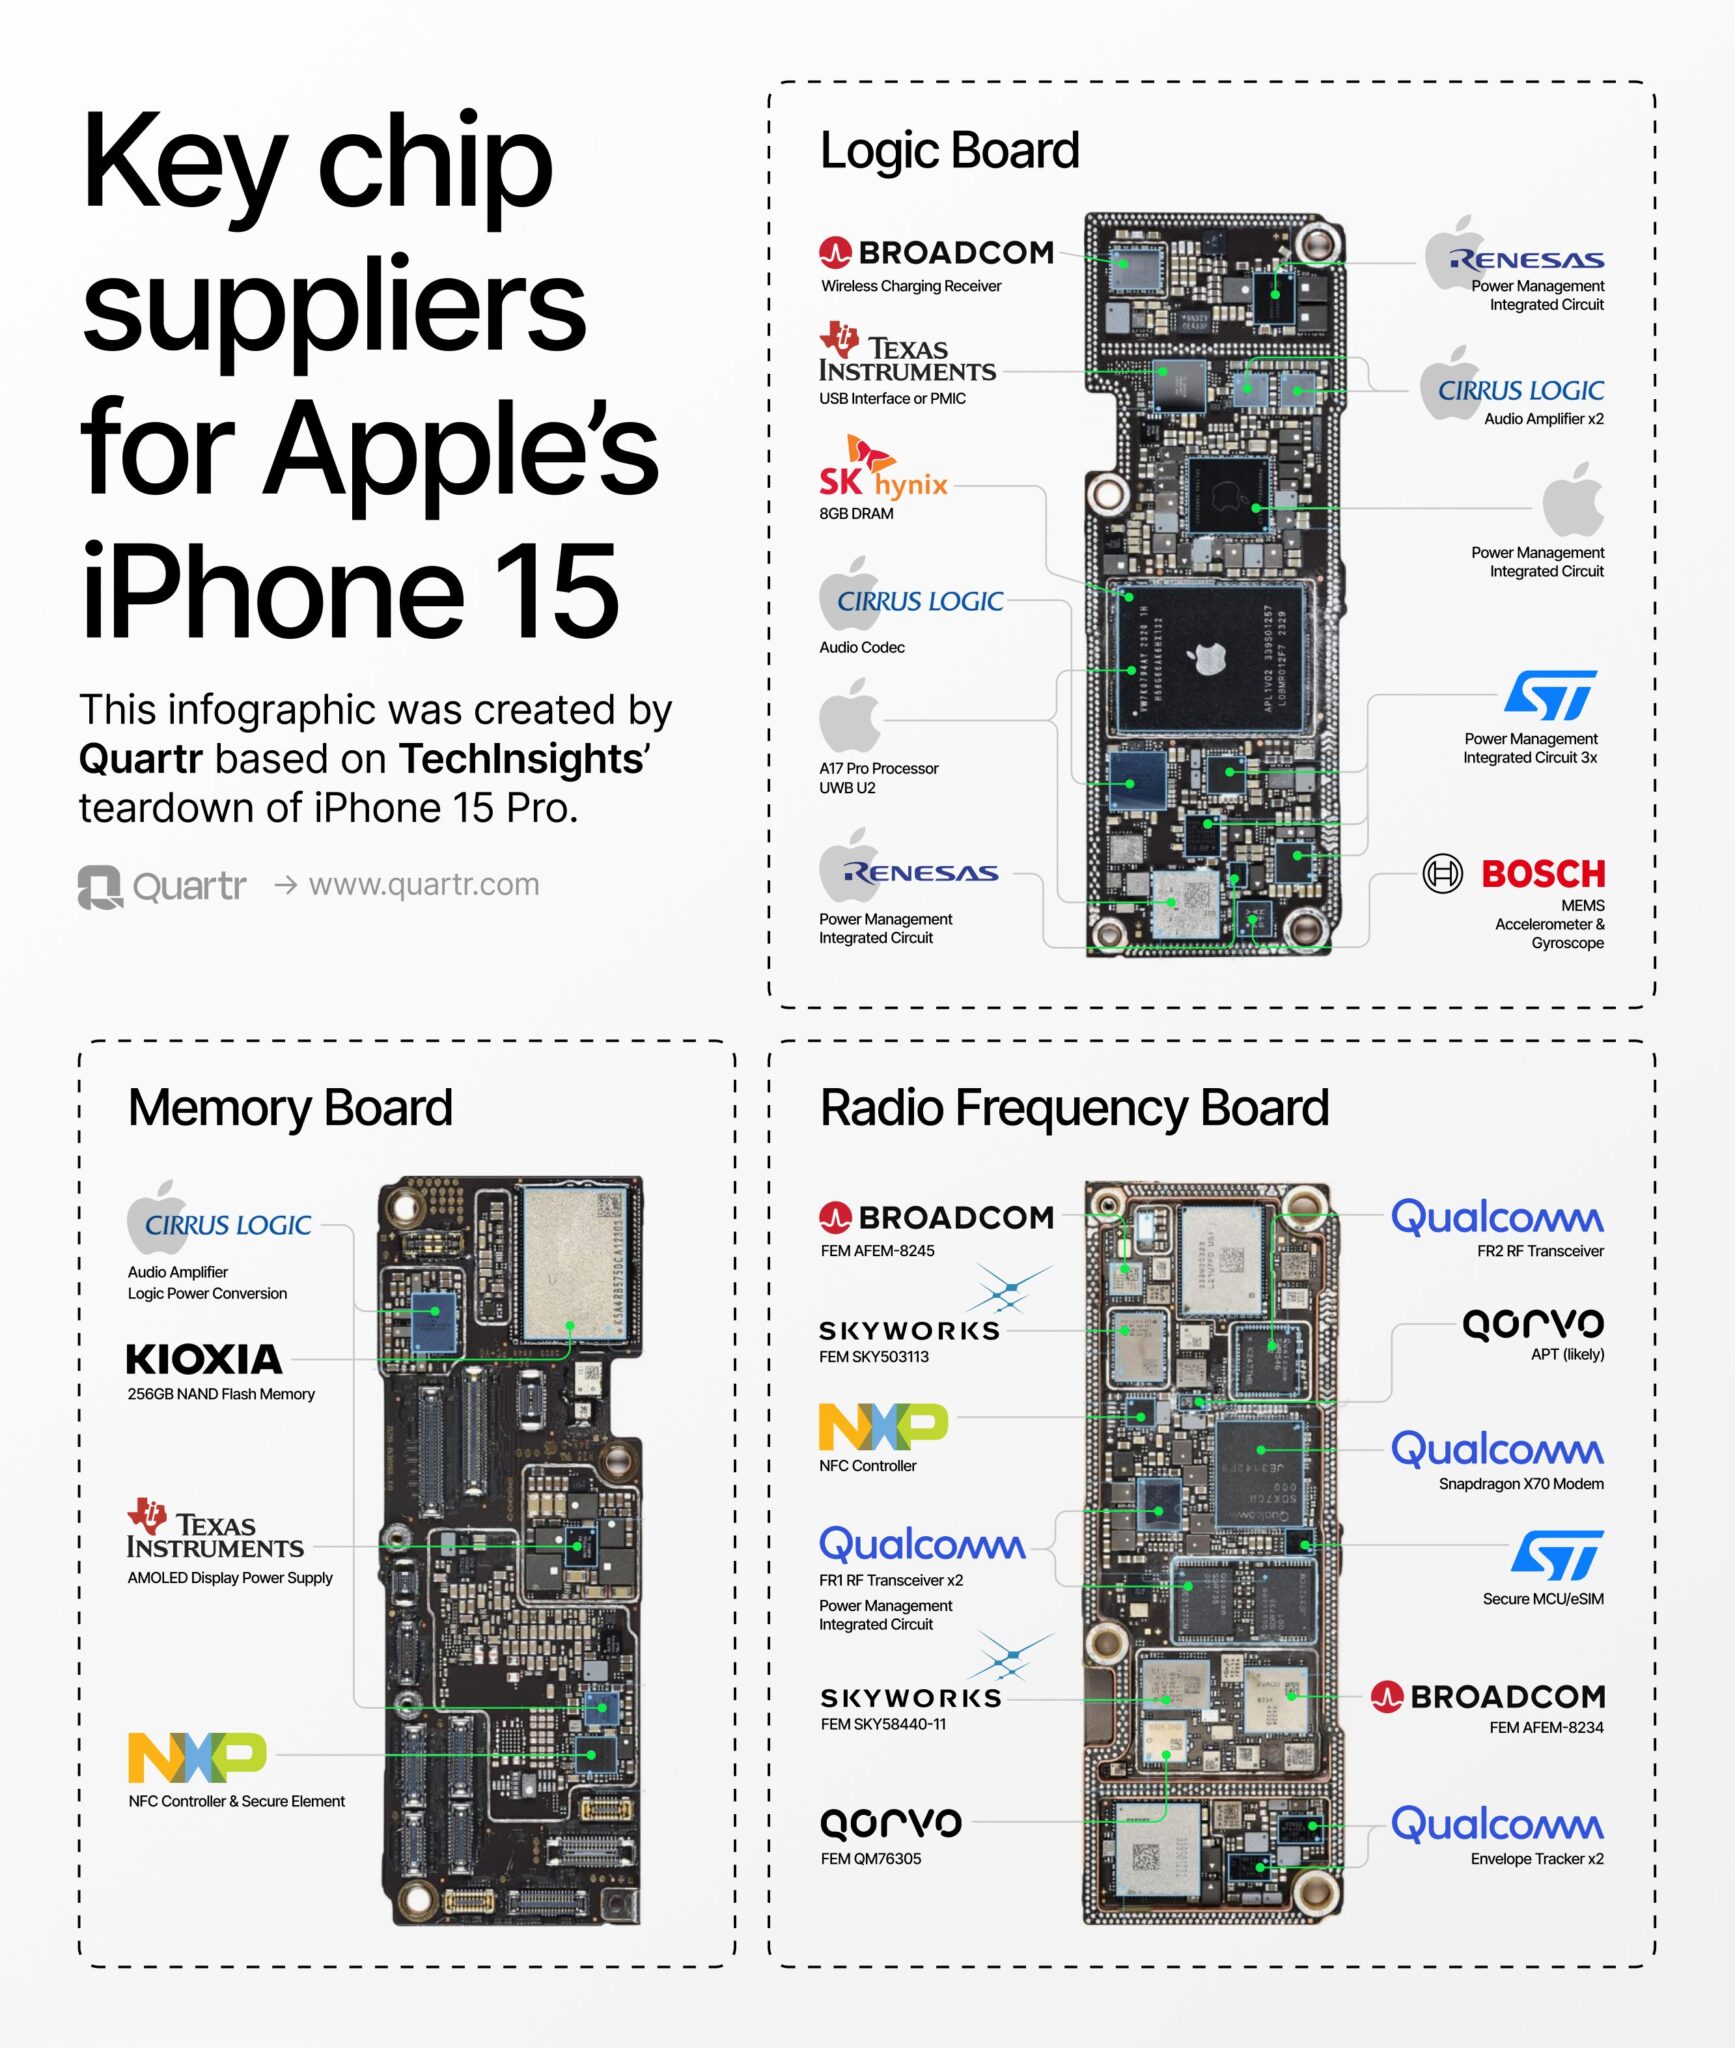 Key-Suppliers-of-Apples-iPhone-15-Infographic-1735x2048.jpg